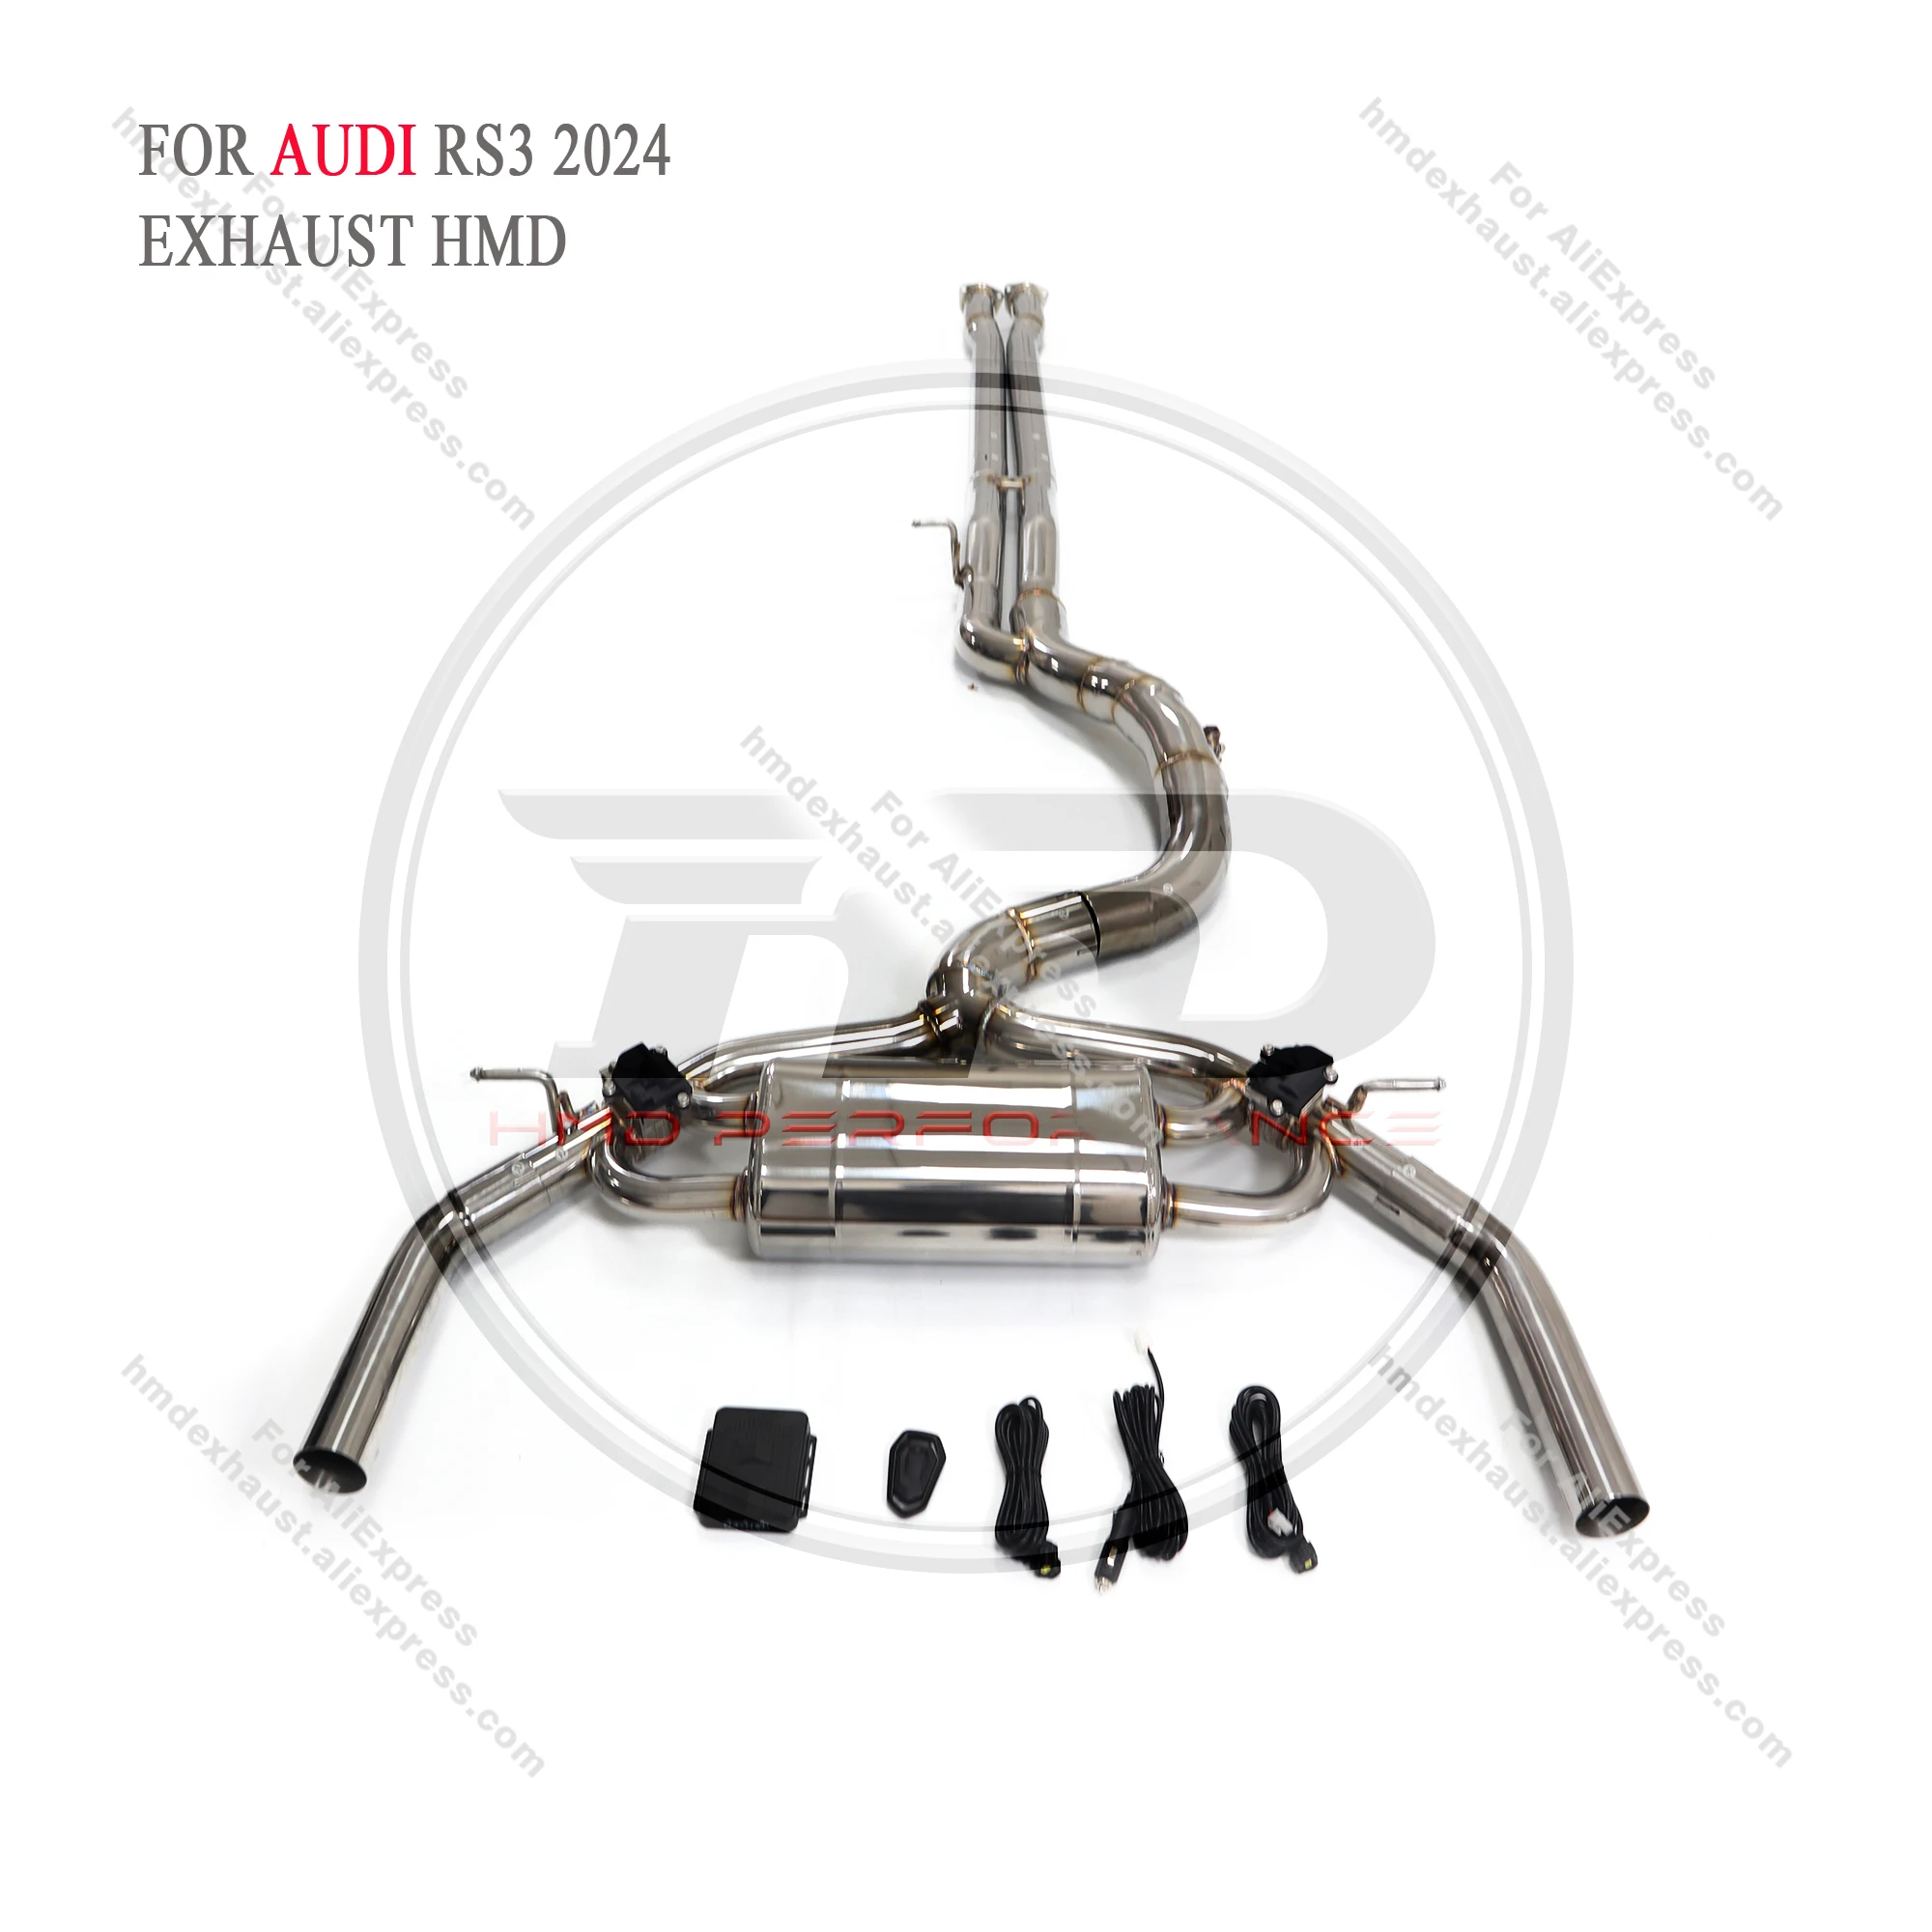 

HMD Exhaust System Stainless Steel Performance Catback for Audi RS3 2024 Muffler With Valve